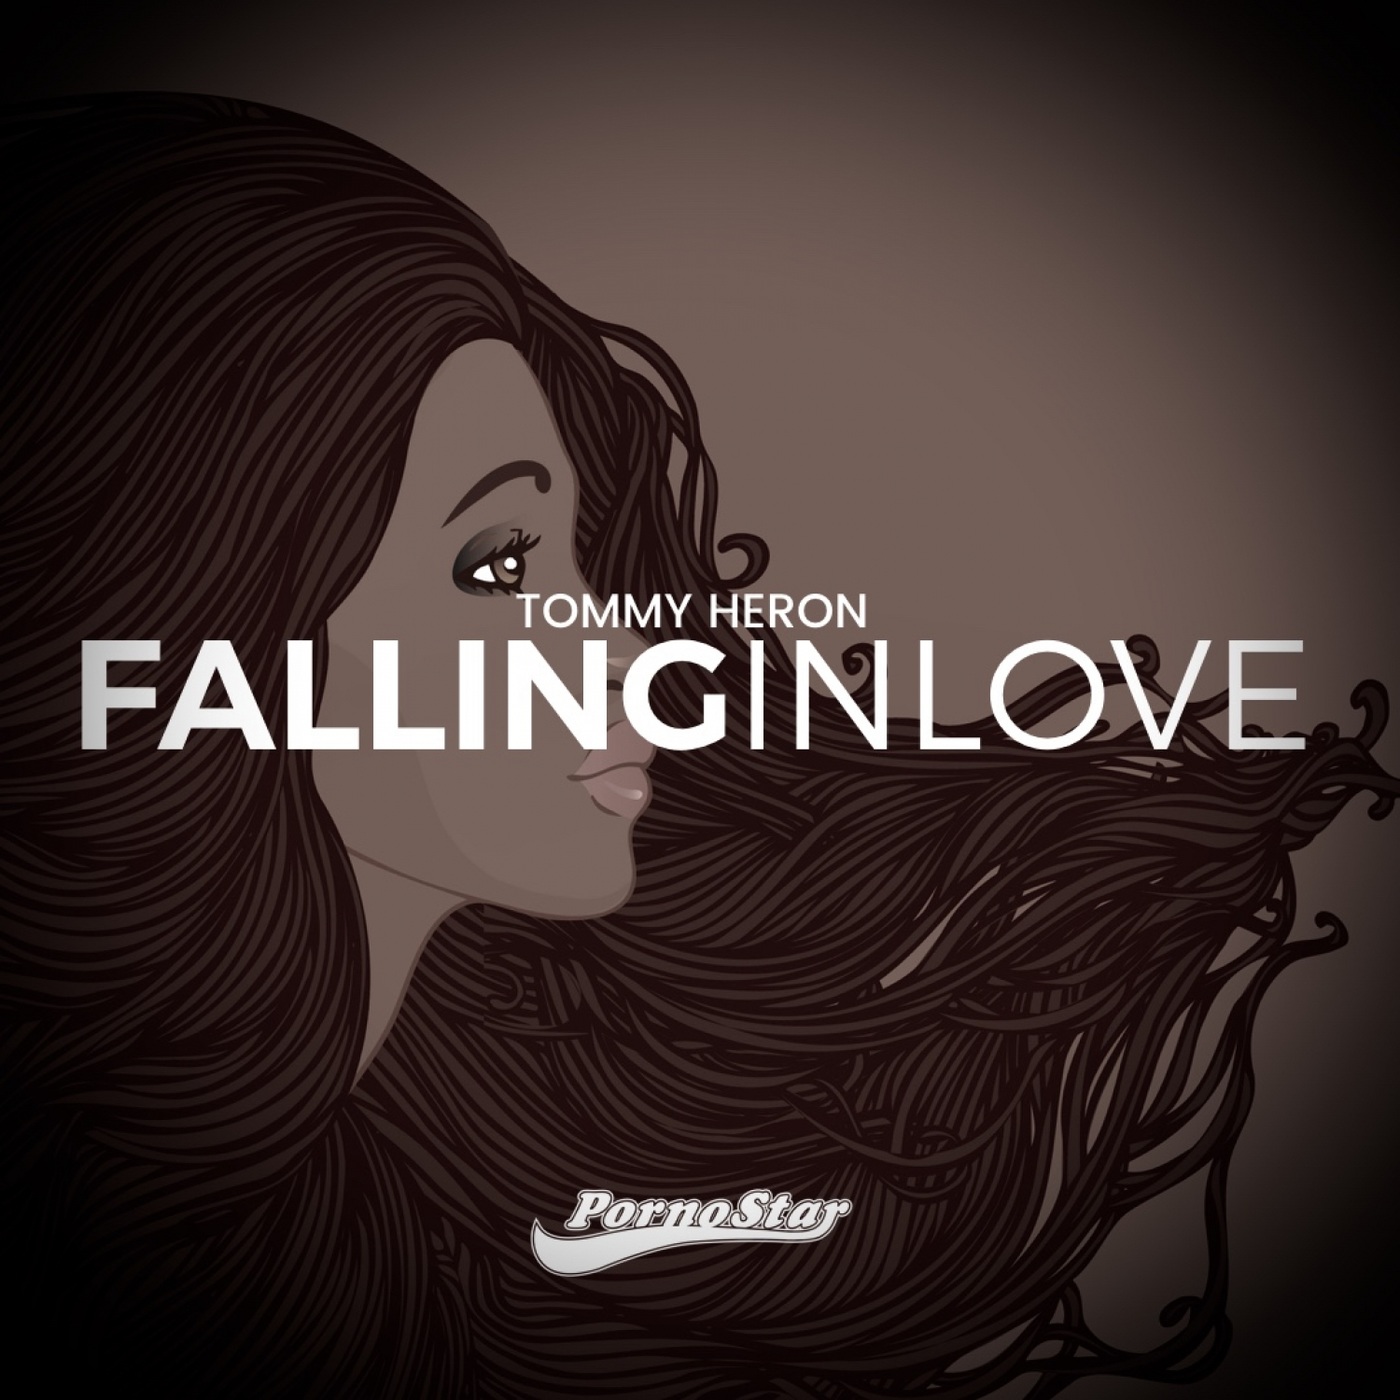 Tommy Heron - Falling in Love / PornoStar Records (US)